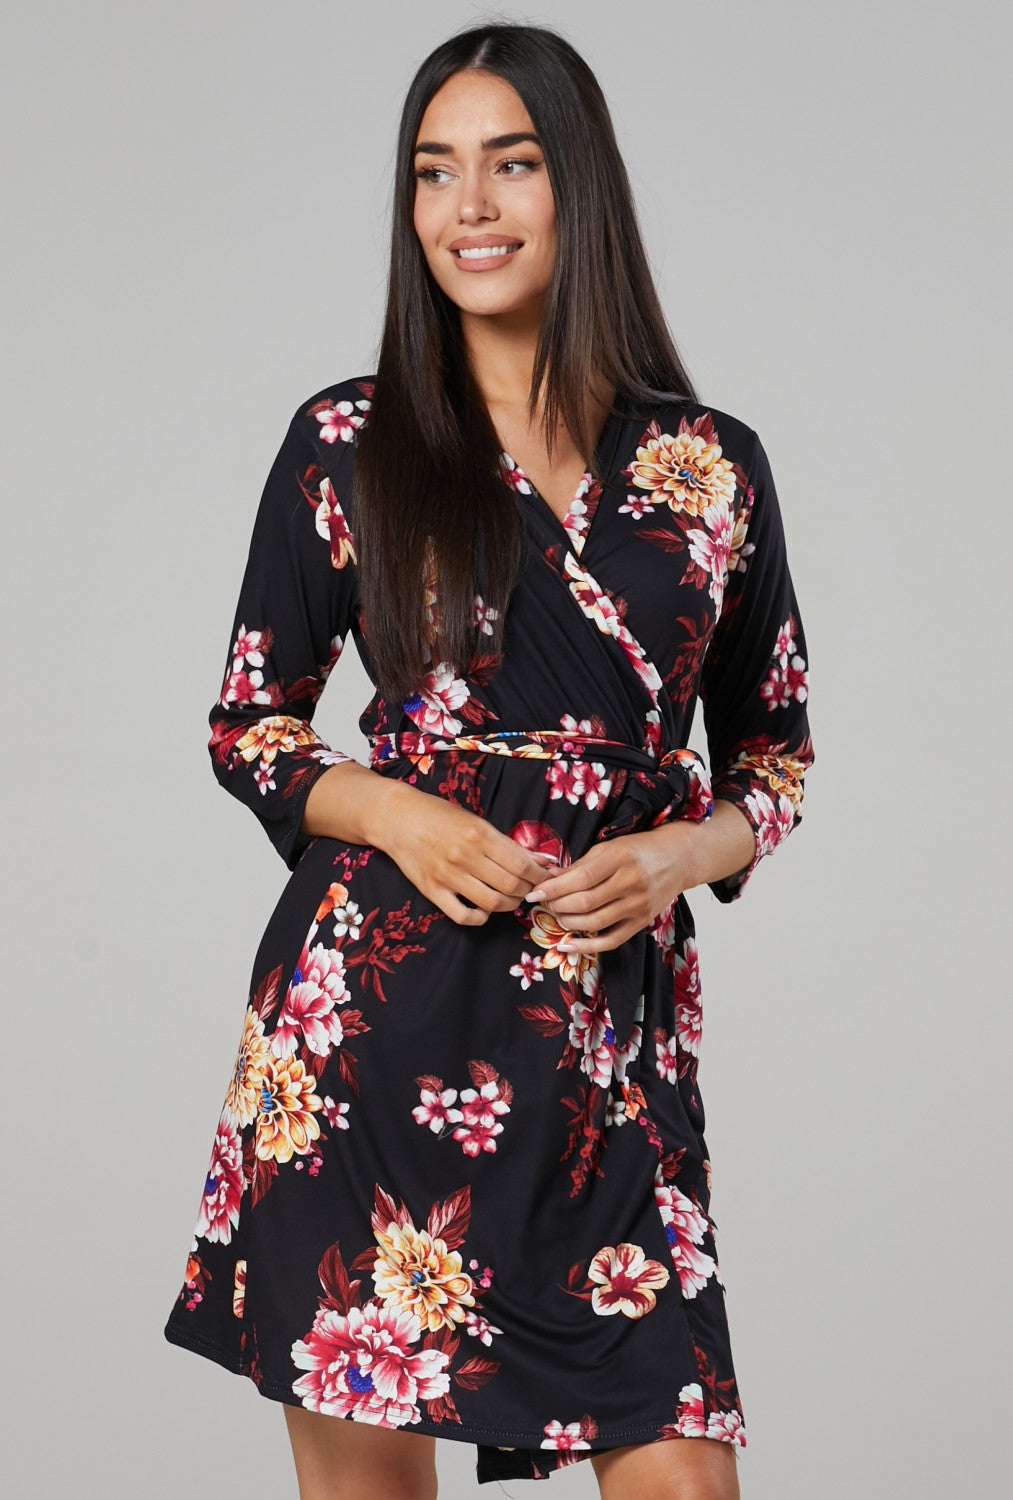 Labor & Delivery Gown in Floral Print